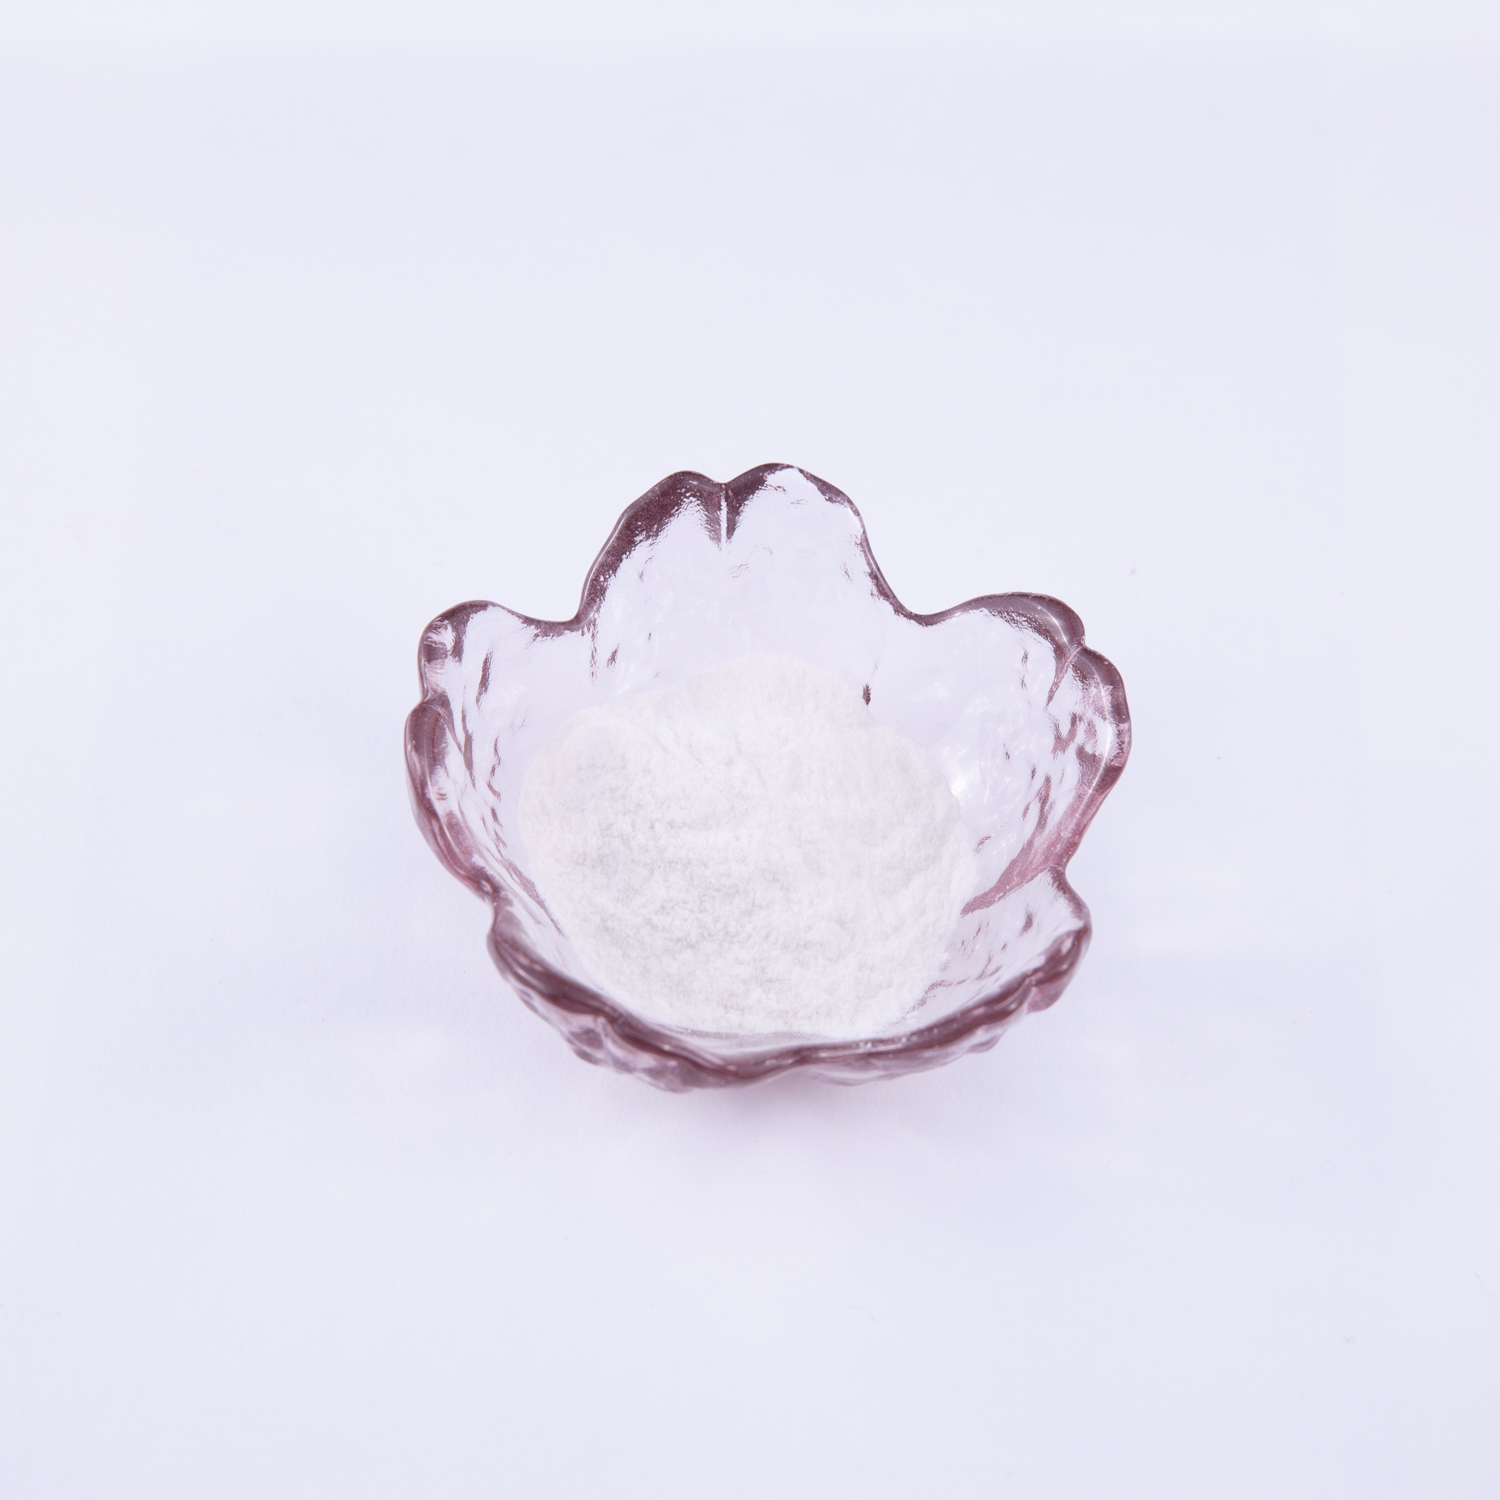 CMC Food grade White Crystal Stabilizers and Thickener Sodium carboxymethyl cellulose CAS NO.9004-32-4